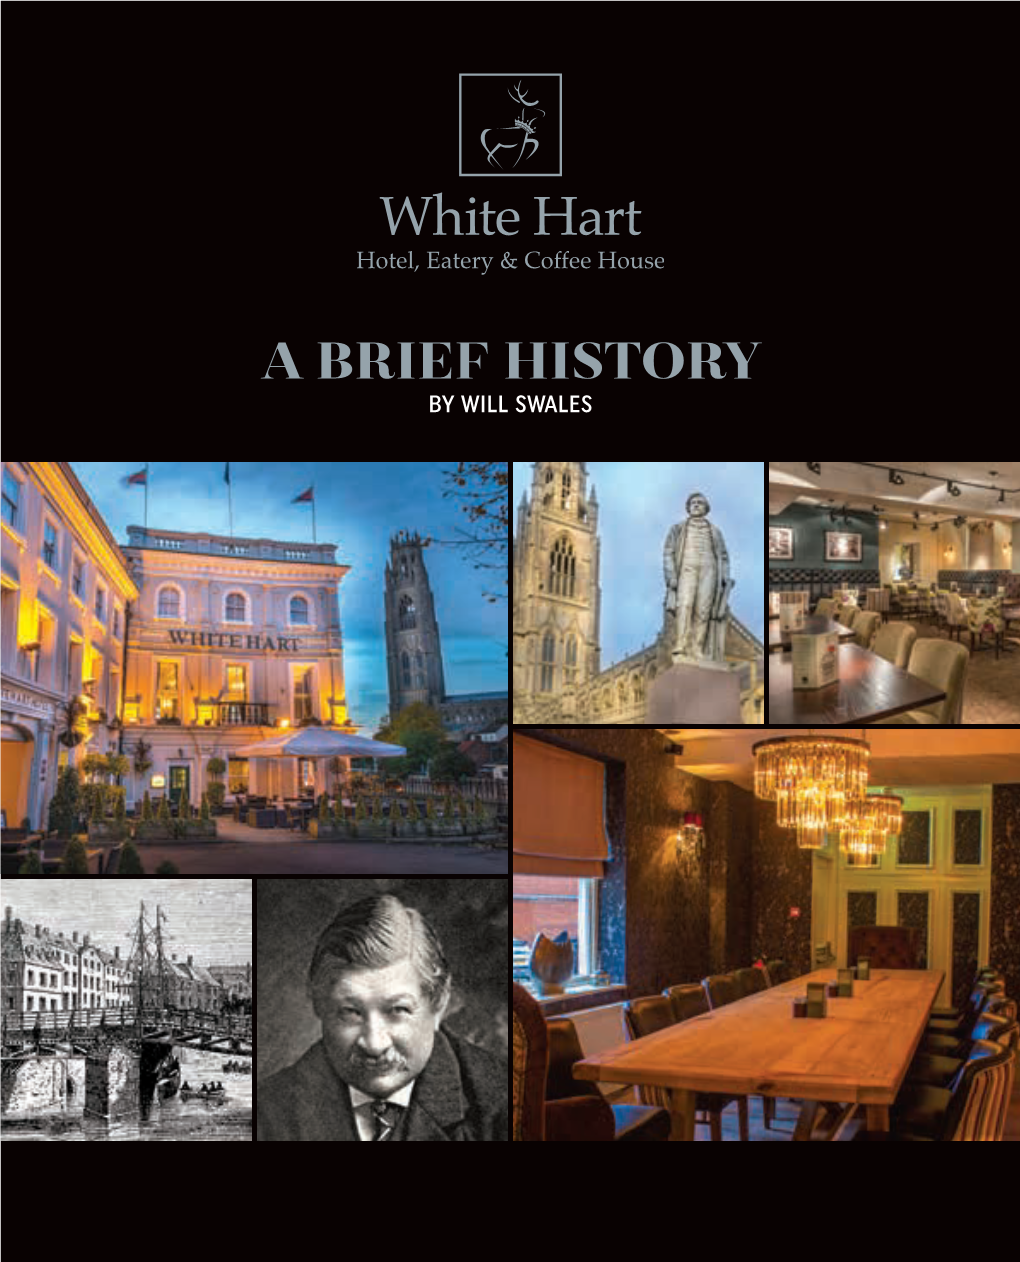 A Brief History by WILL SWALES Welcome